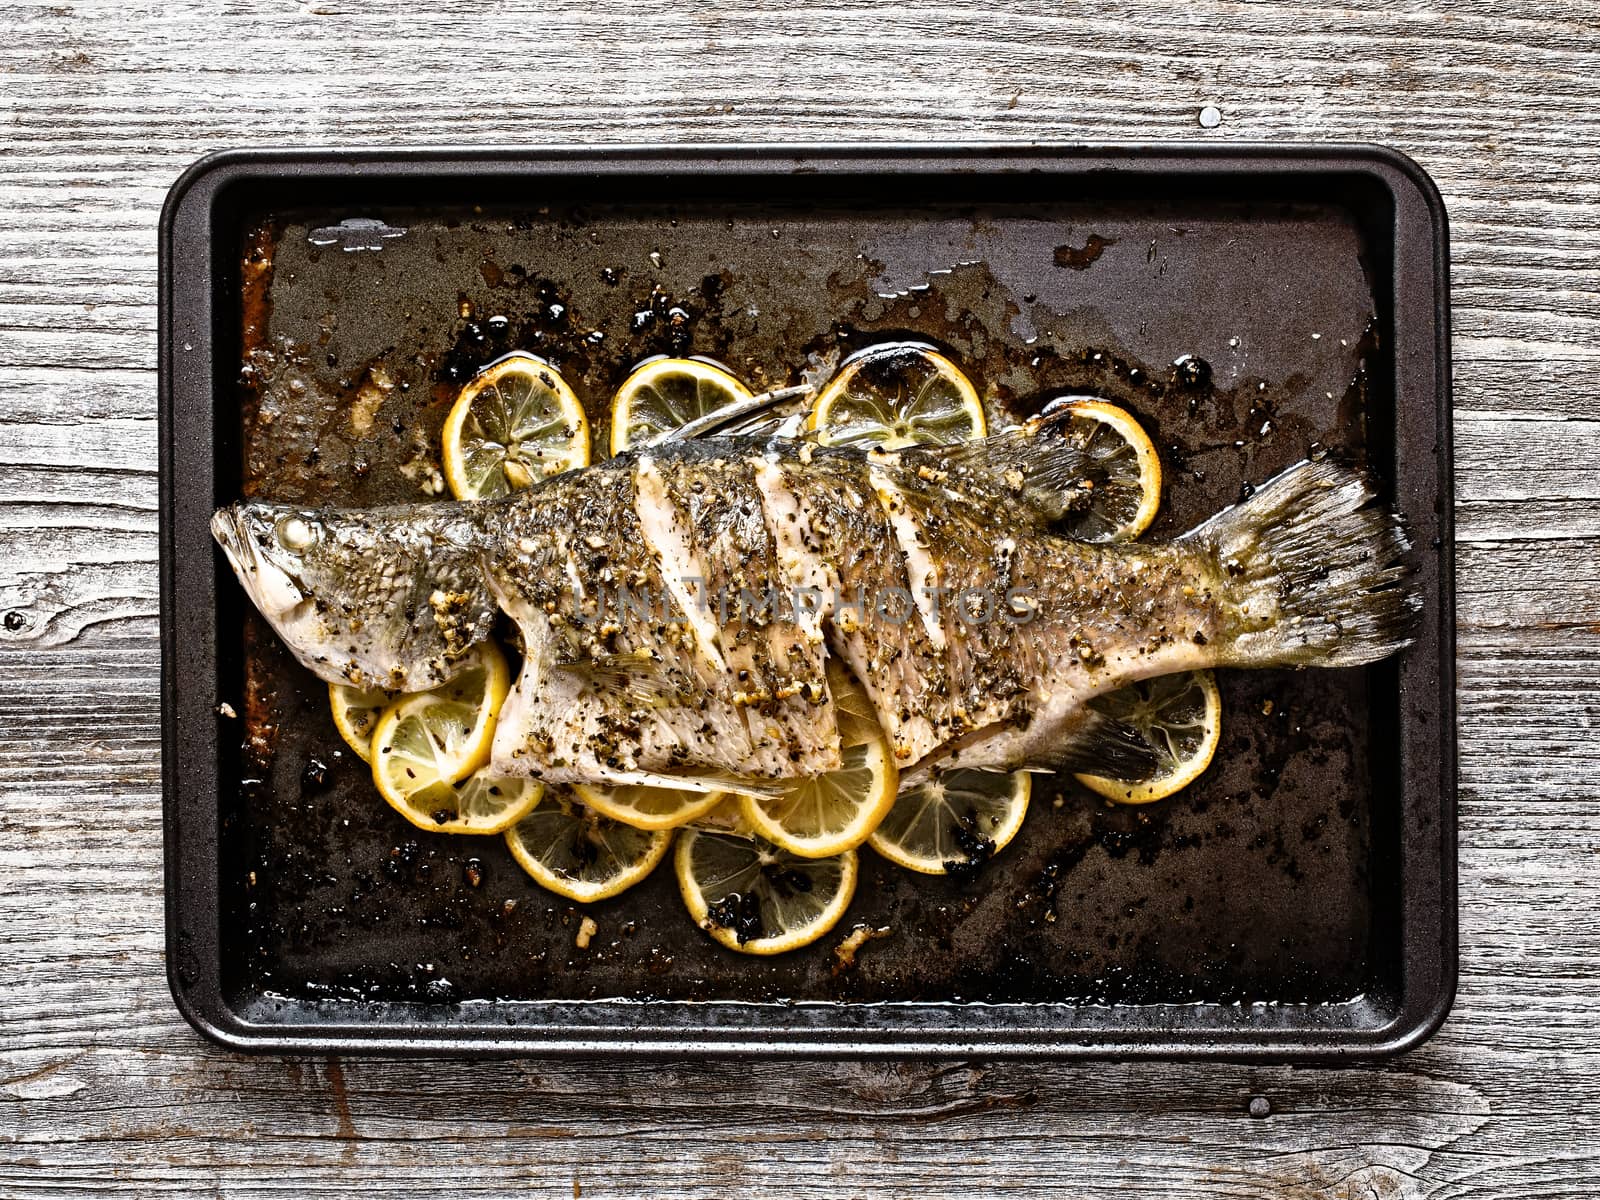 rustic baked fish by zkruger